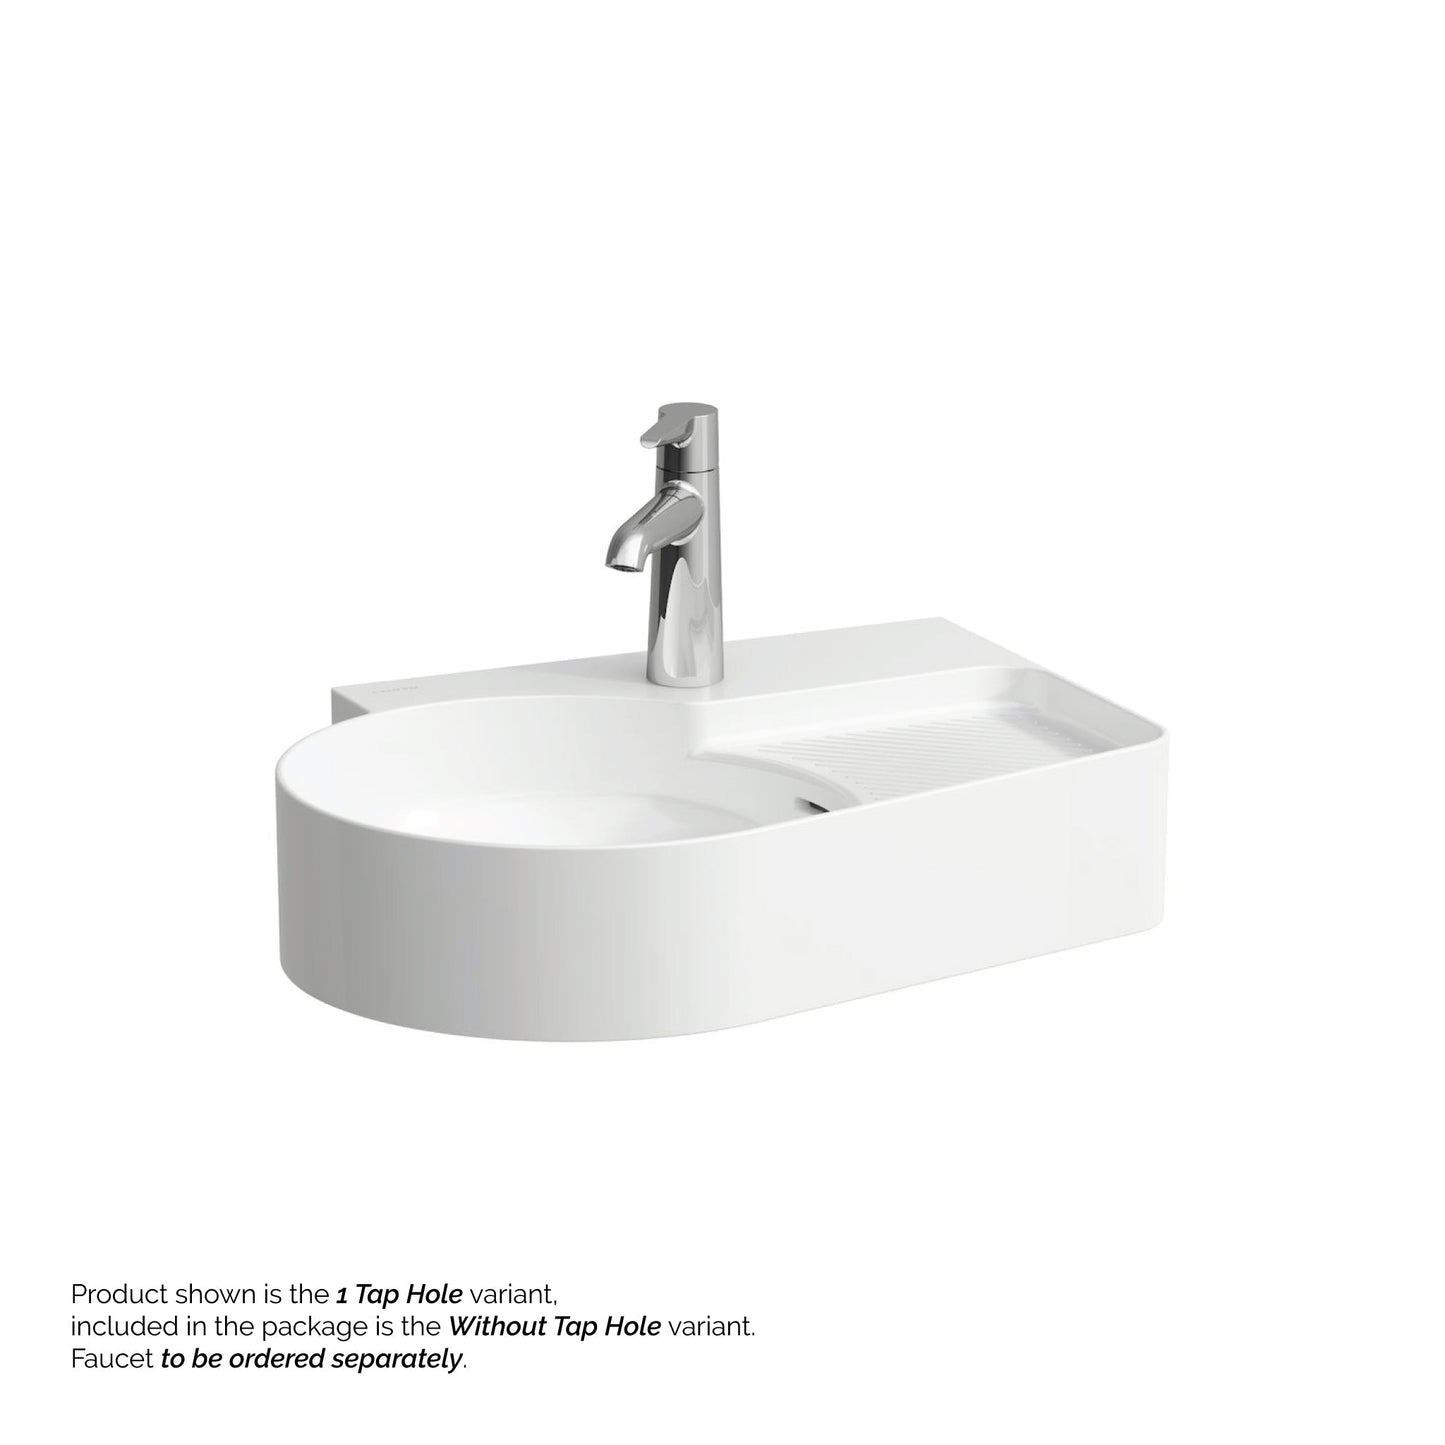 Laufen Val 21" x 16" White Countertop Bathroom Sink Without Faucet Hole